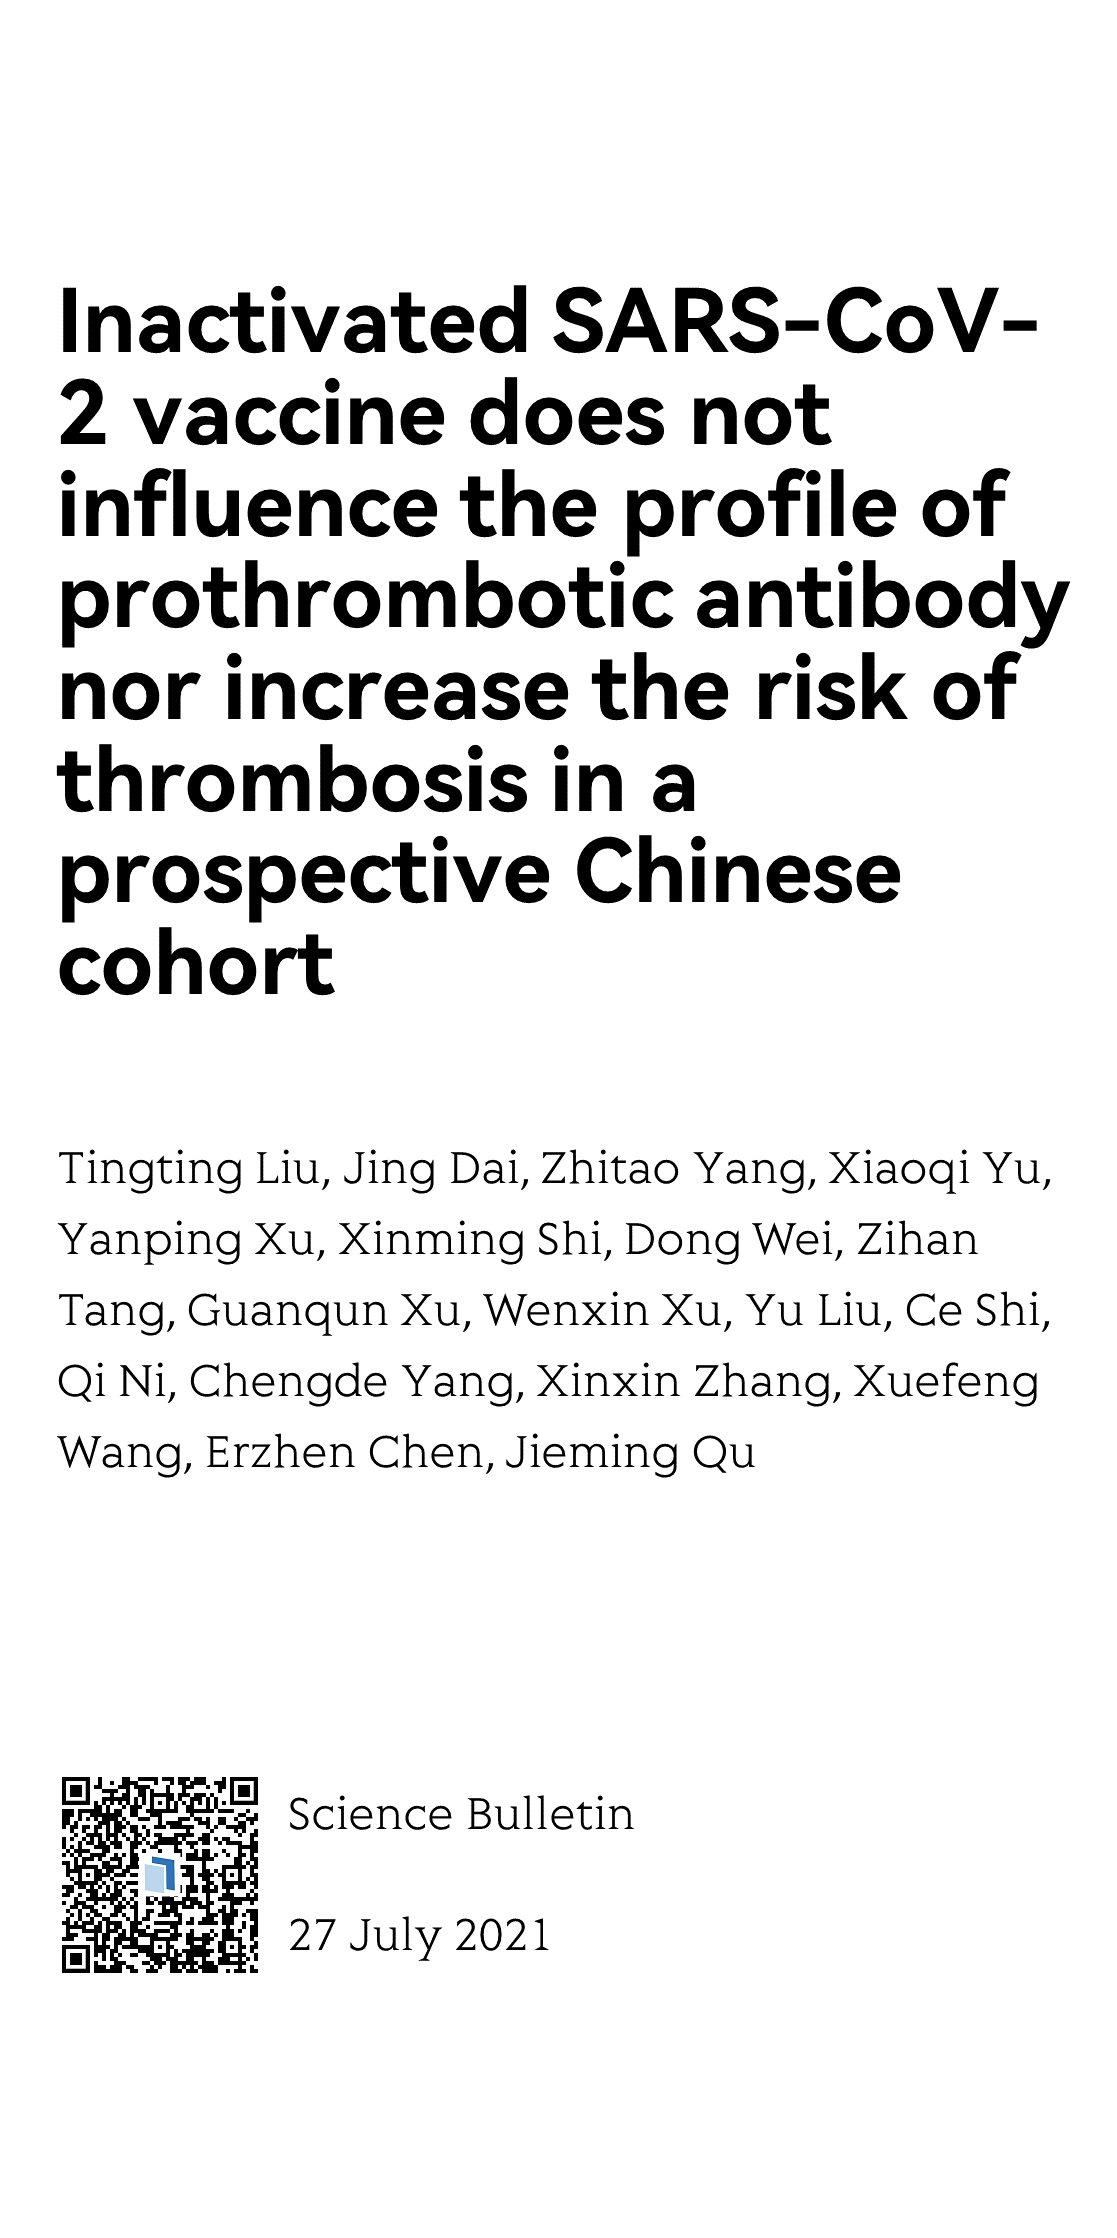 Inactivated SARS-CoV-2 vaccine does not influence the profile of prothrombotic antibody nor increase the risk of thrombosis in a prospective Chinese cohort_1